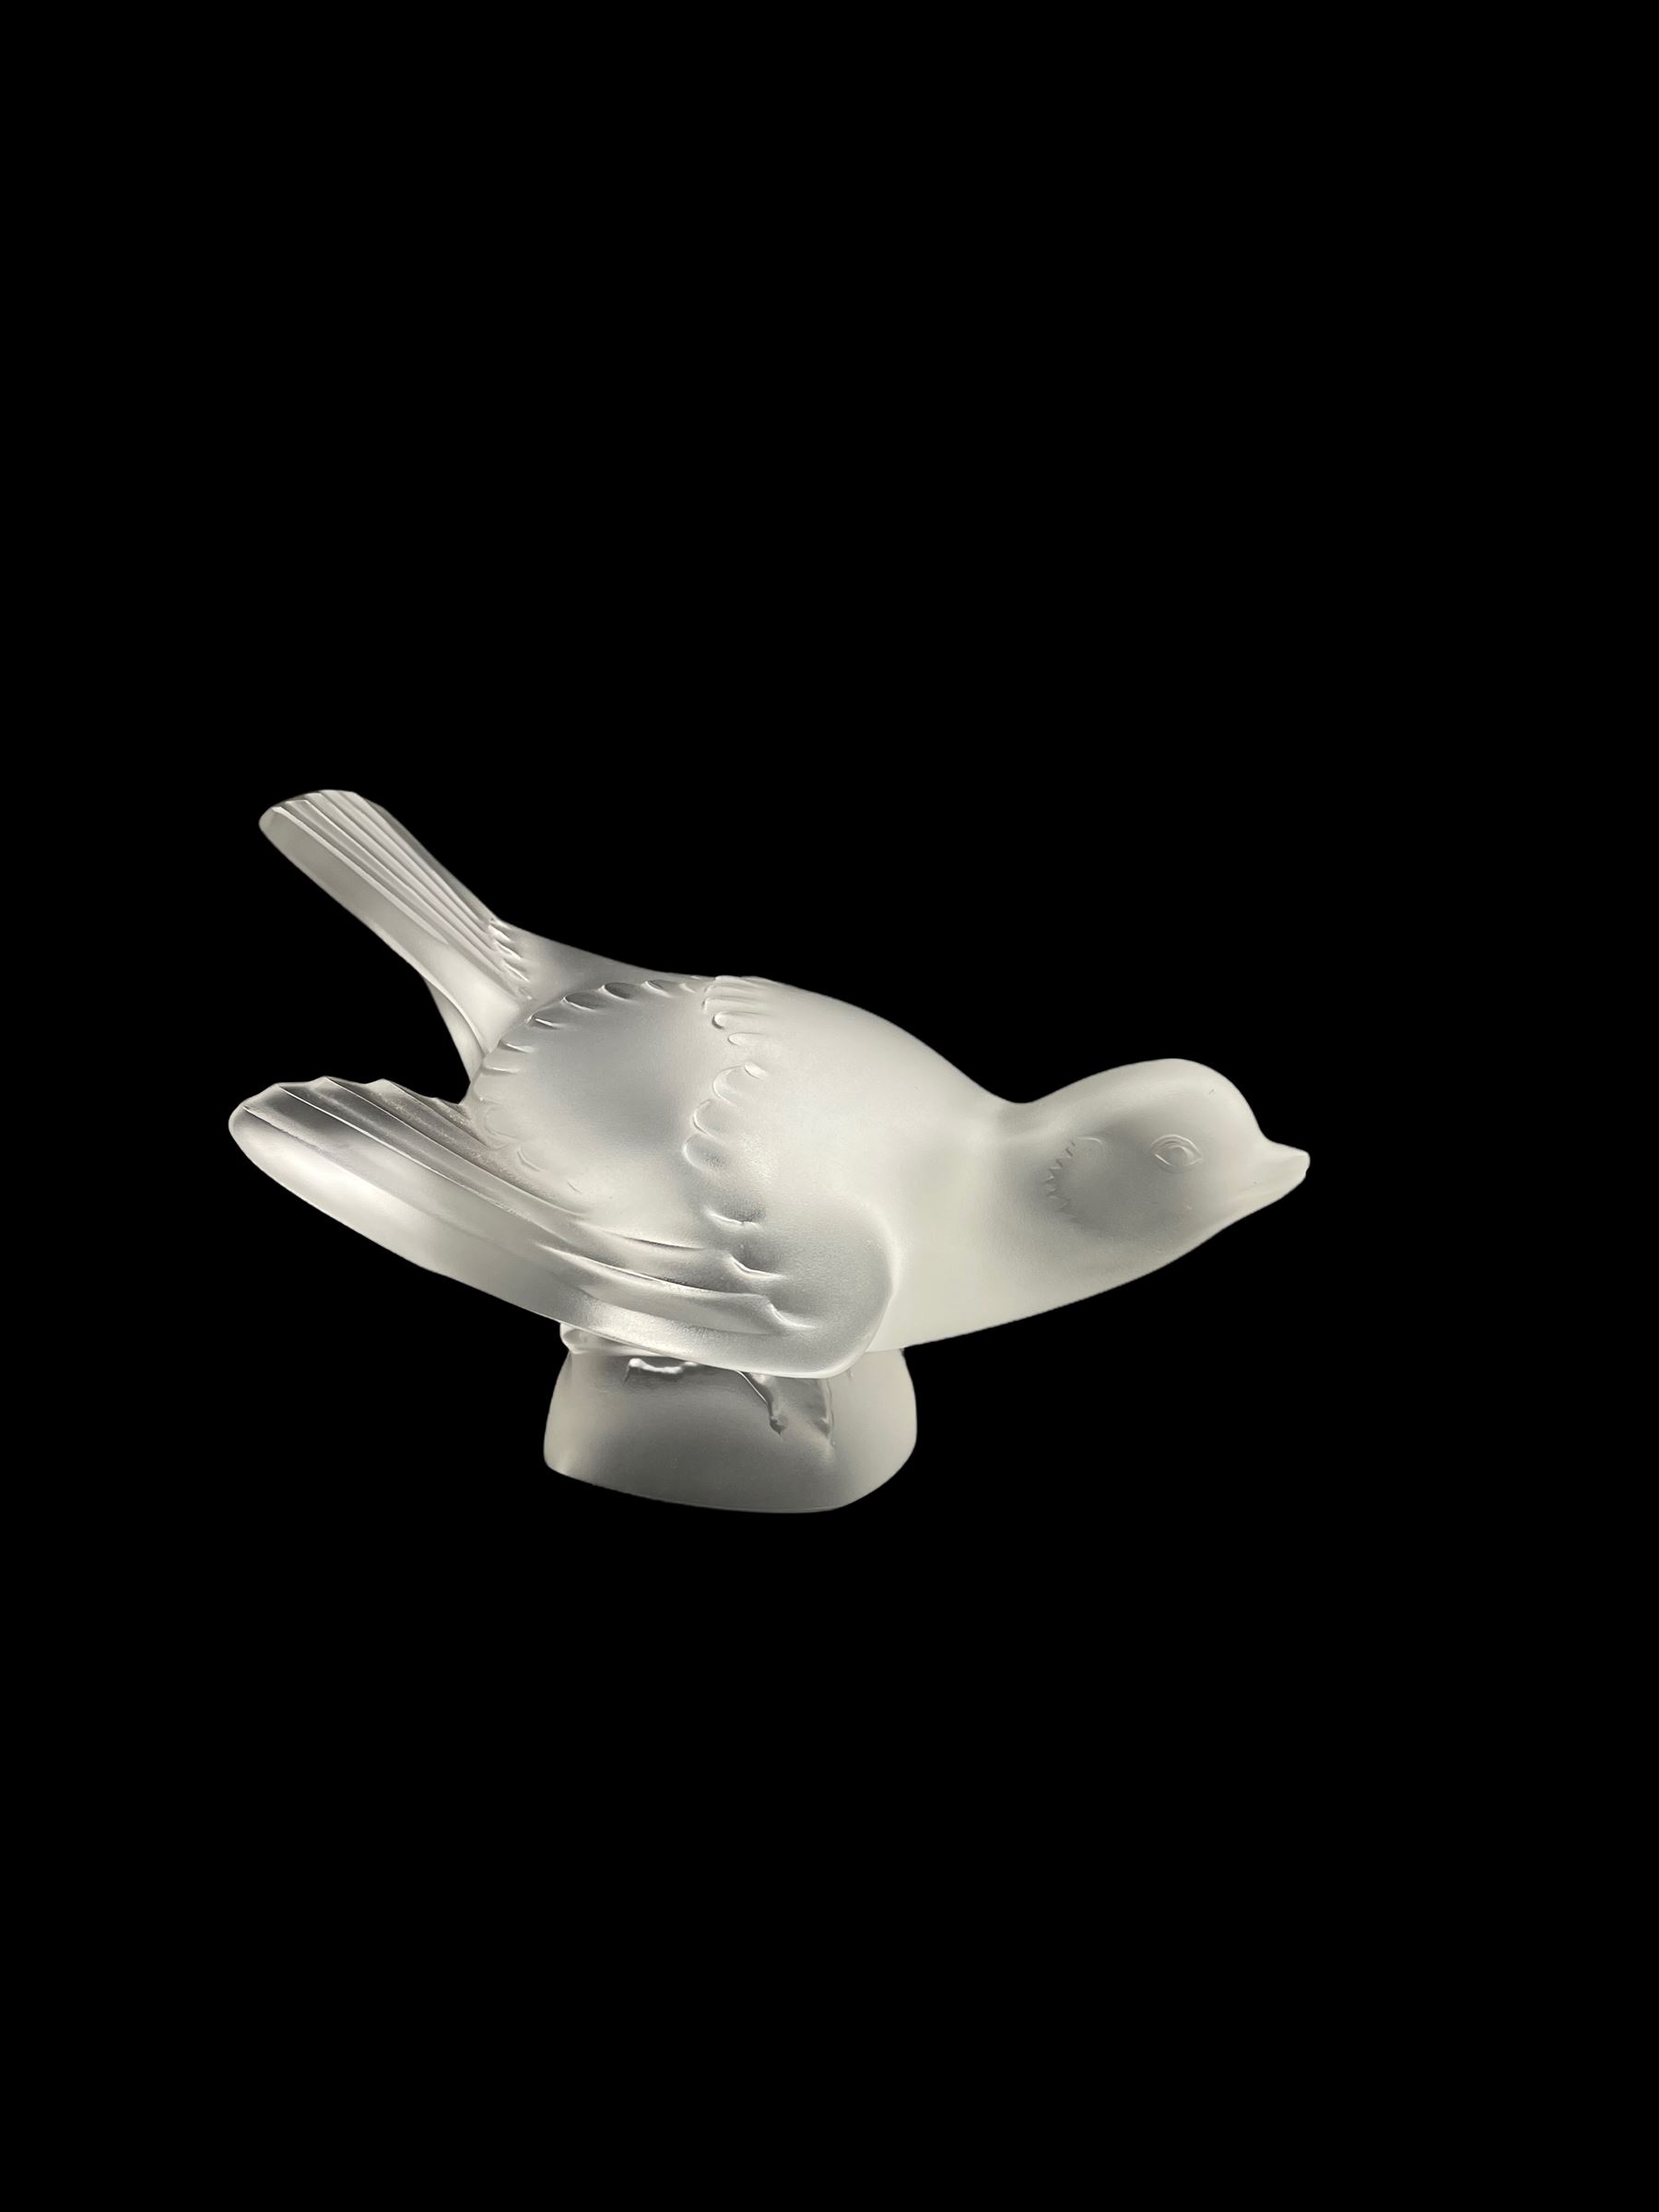 Lalique frosted glass model of a Sparrow with wings splayed - Image 2 of 3